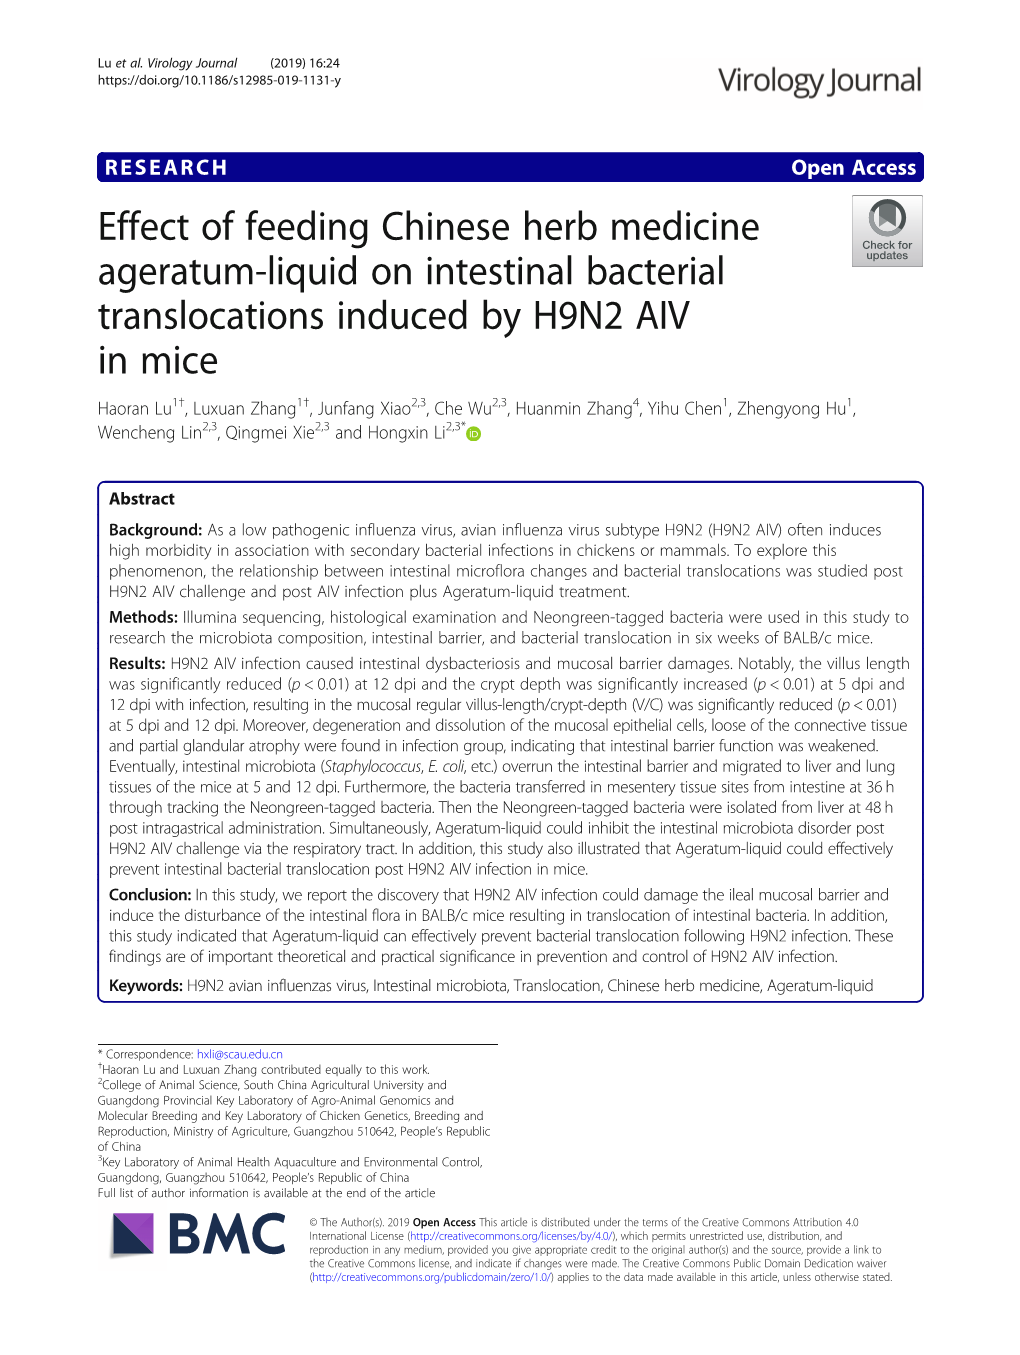 Effect of Feeding Chinese Herb Medicine Ageratum-Liquid on Intestinal Bacterial Translocations Induced by H9N2 AIV in Mice